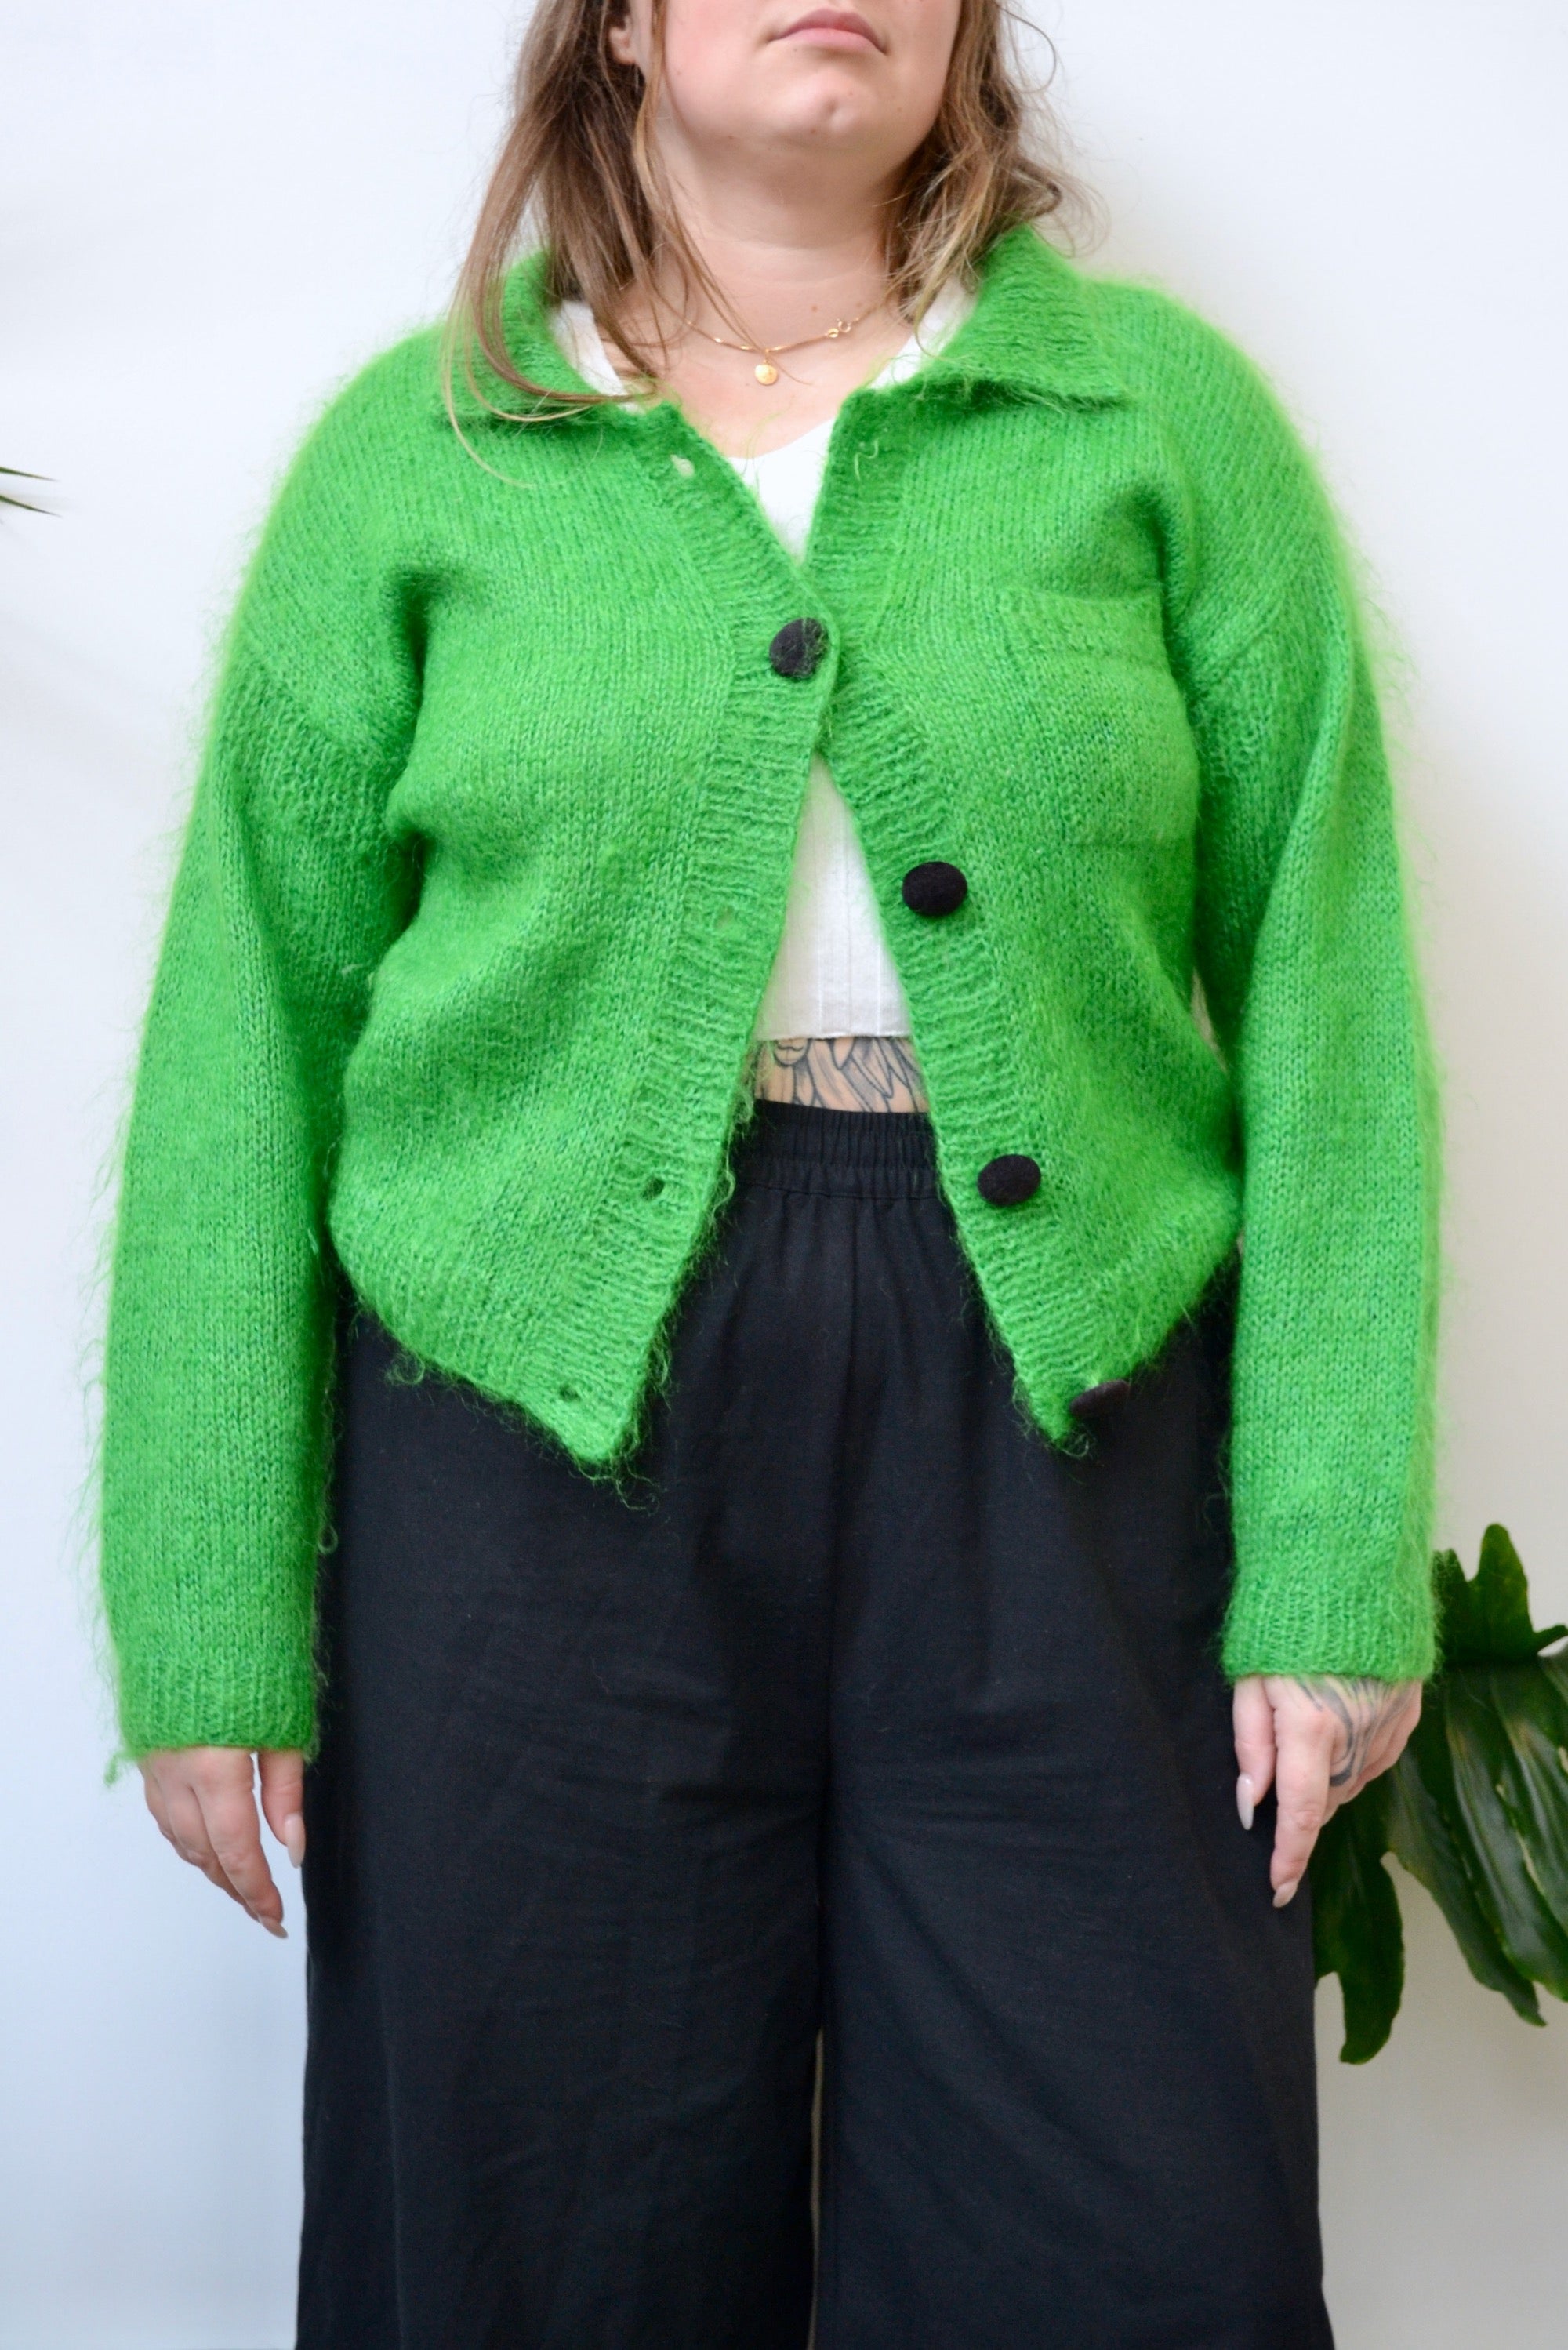 The Grinch Mohair Knit